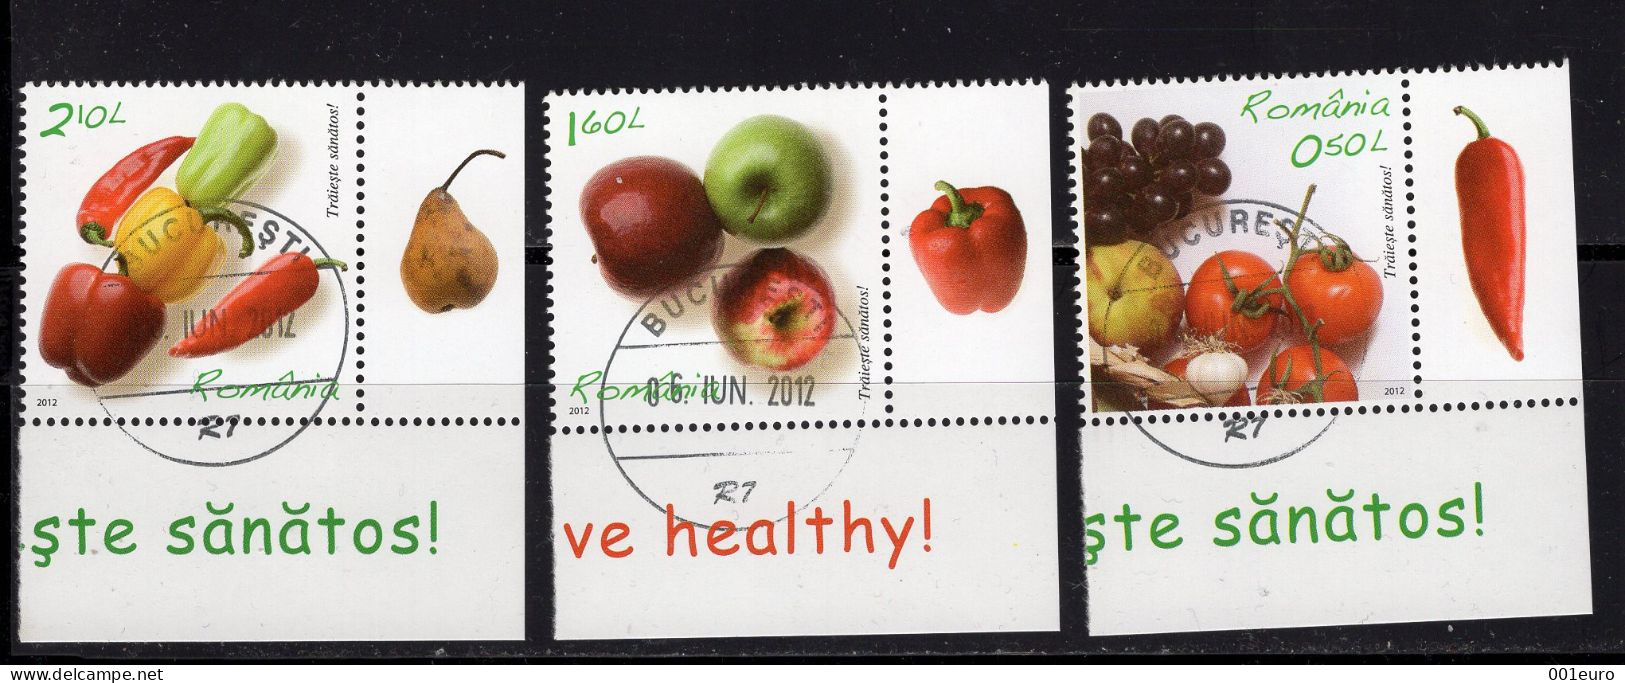 ROMANIA 2012: LIVE HEALTHY! FRUITS & VEGETABLES, Used Stamps With Margins - Registered Shipping! - Used Stamps